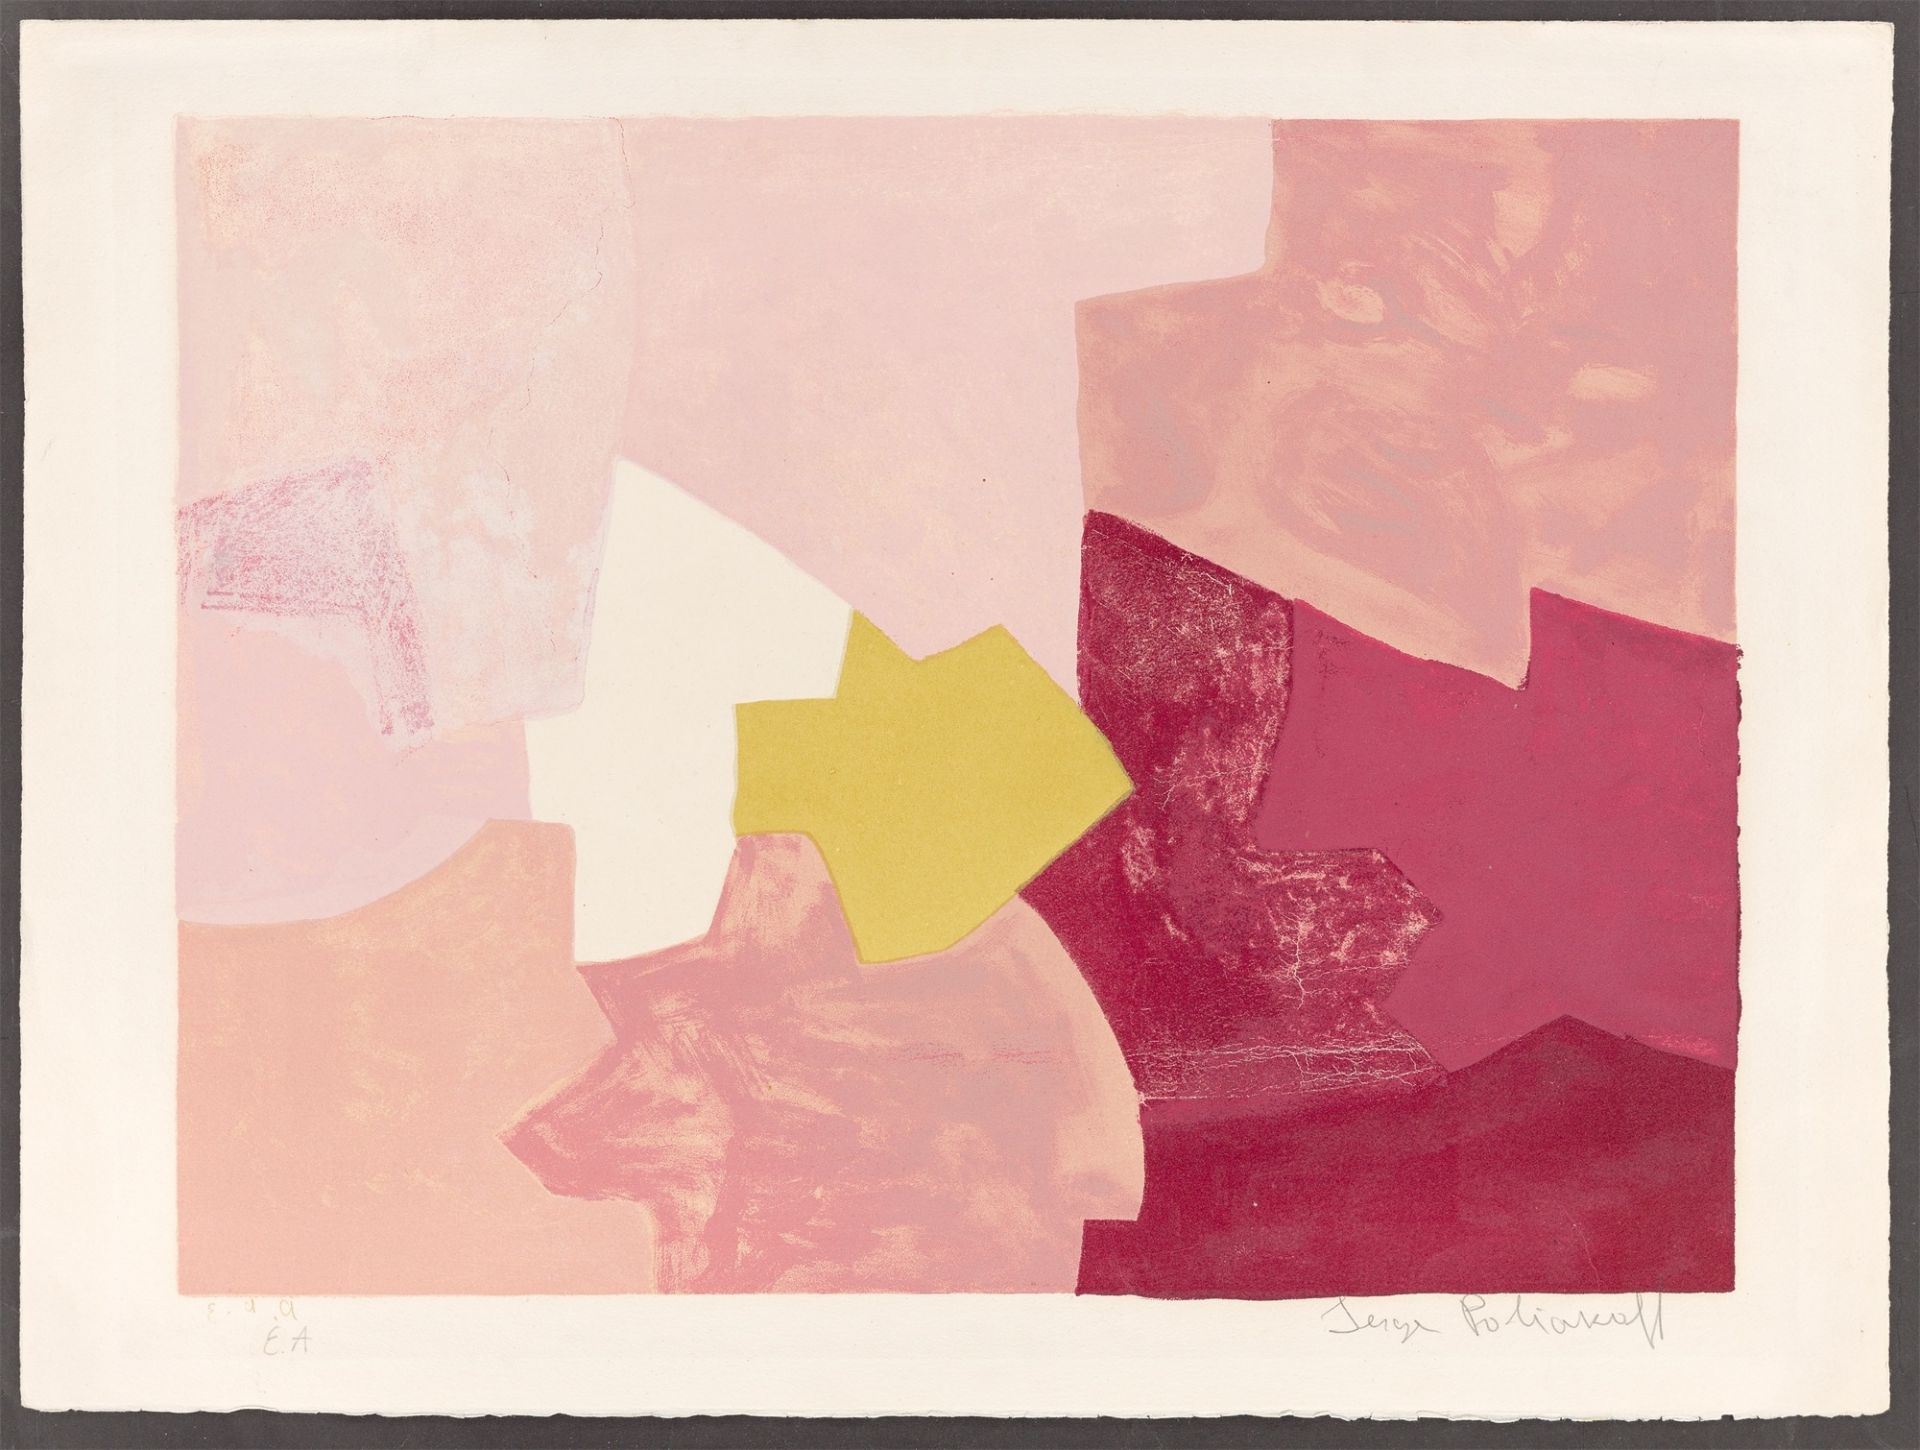 Serge Poliakoff. ”Composition rose”. 1959 - Image 2 of 3